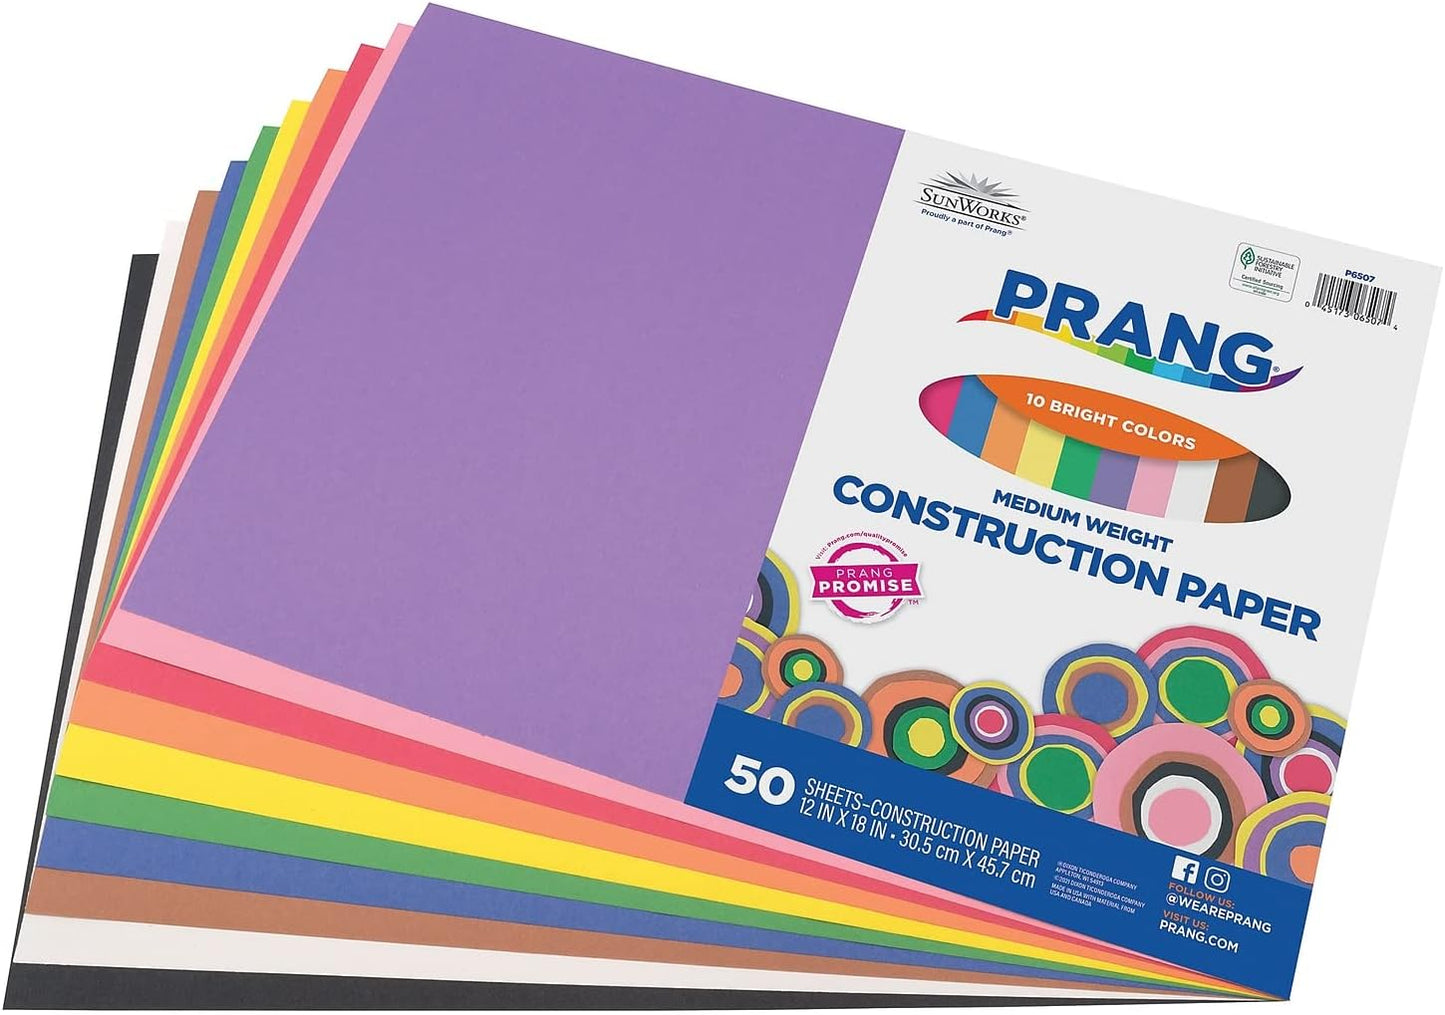 Prang (Formerly ) Construction Paper, 10 Assorted Colors, 12" X 18", 50 Sheets